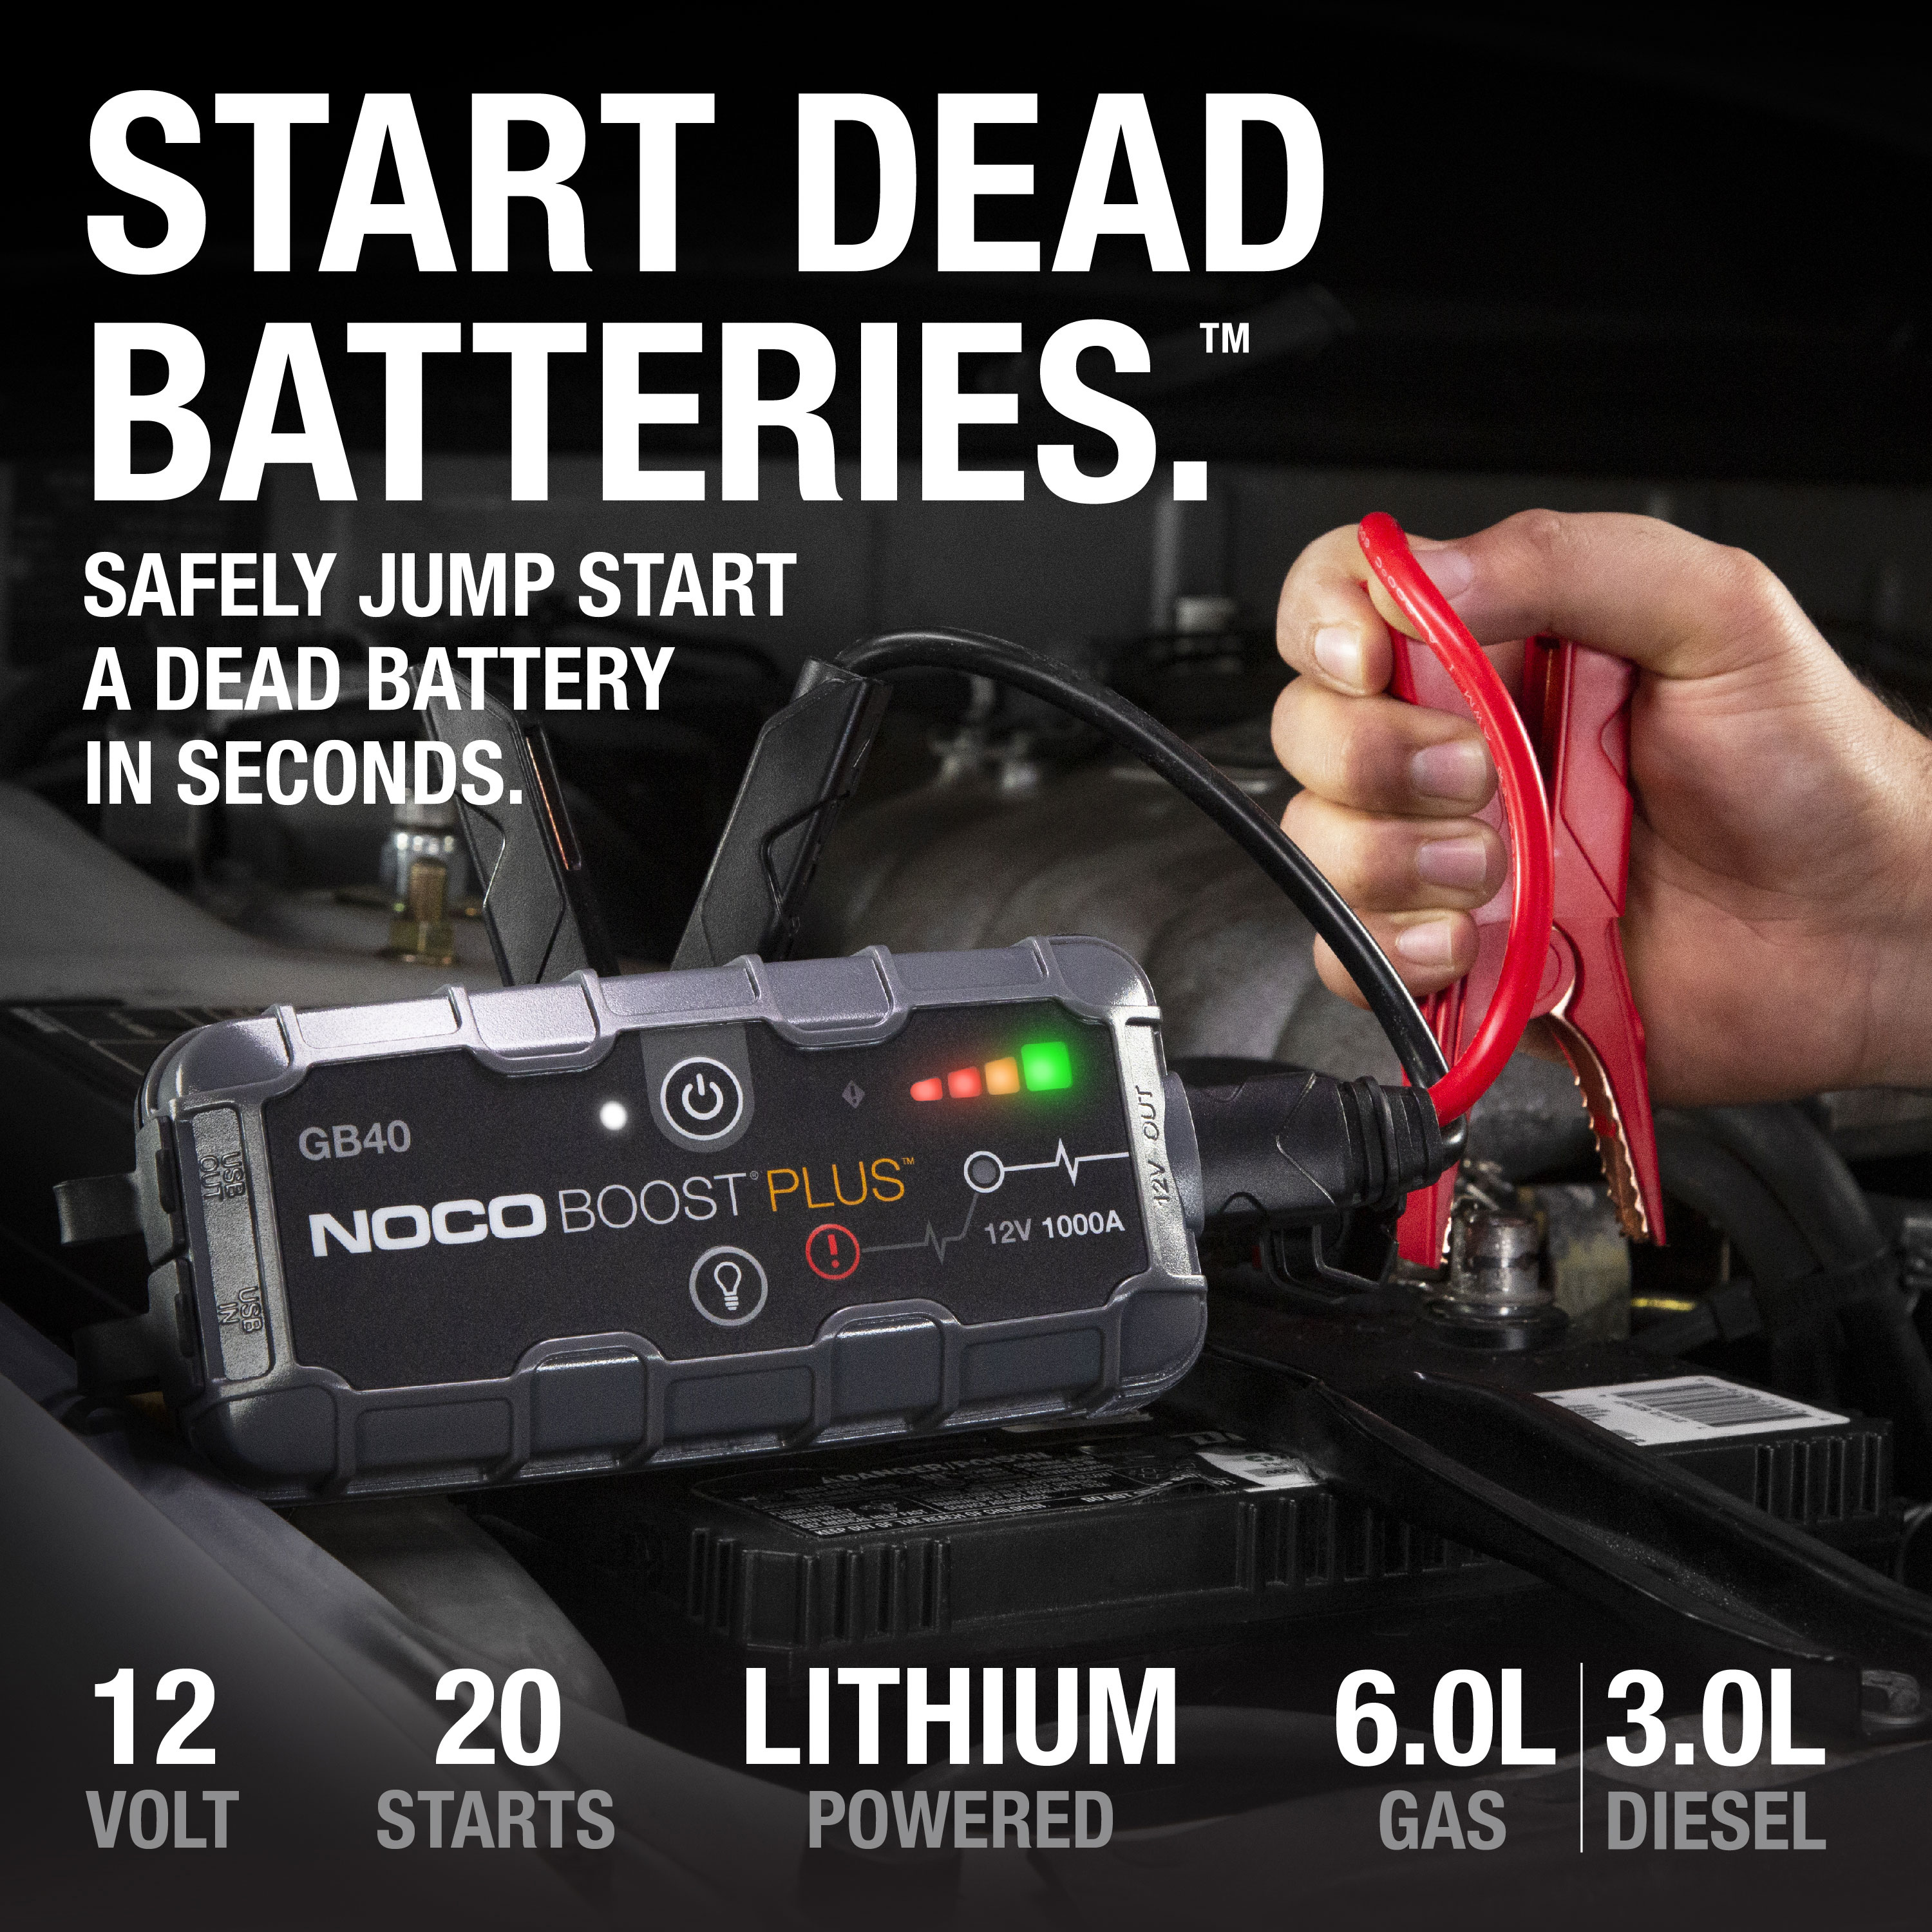 NOCO Boost Plus GB40 1000A 12V UltraSafe Portable Lithium Jump Starter - image 2 of 7